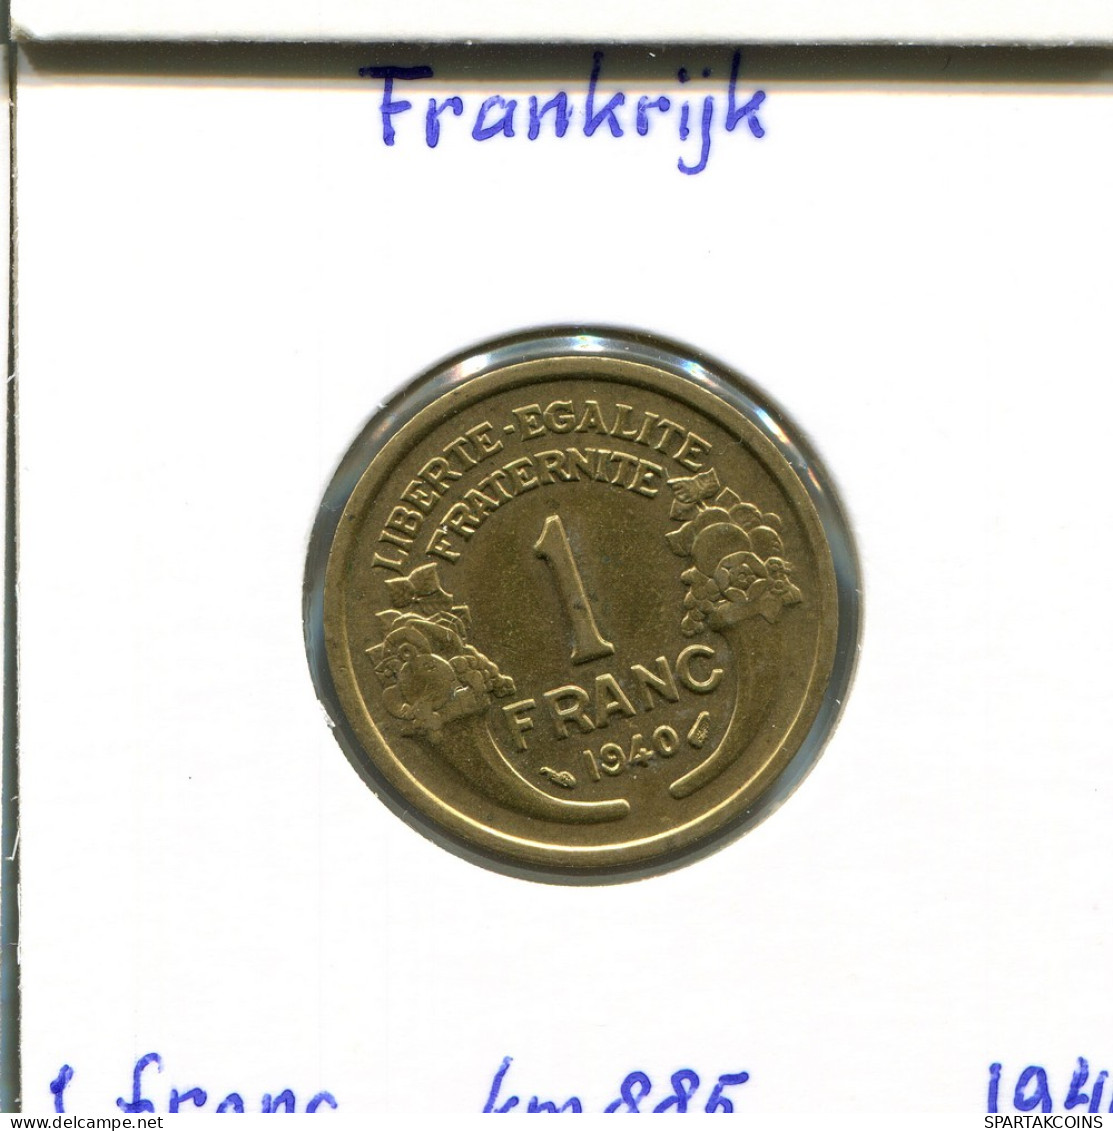 1 FRANC 1940 FRANCE Coin French Coin #AM279 - 1 Franc